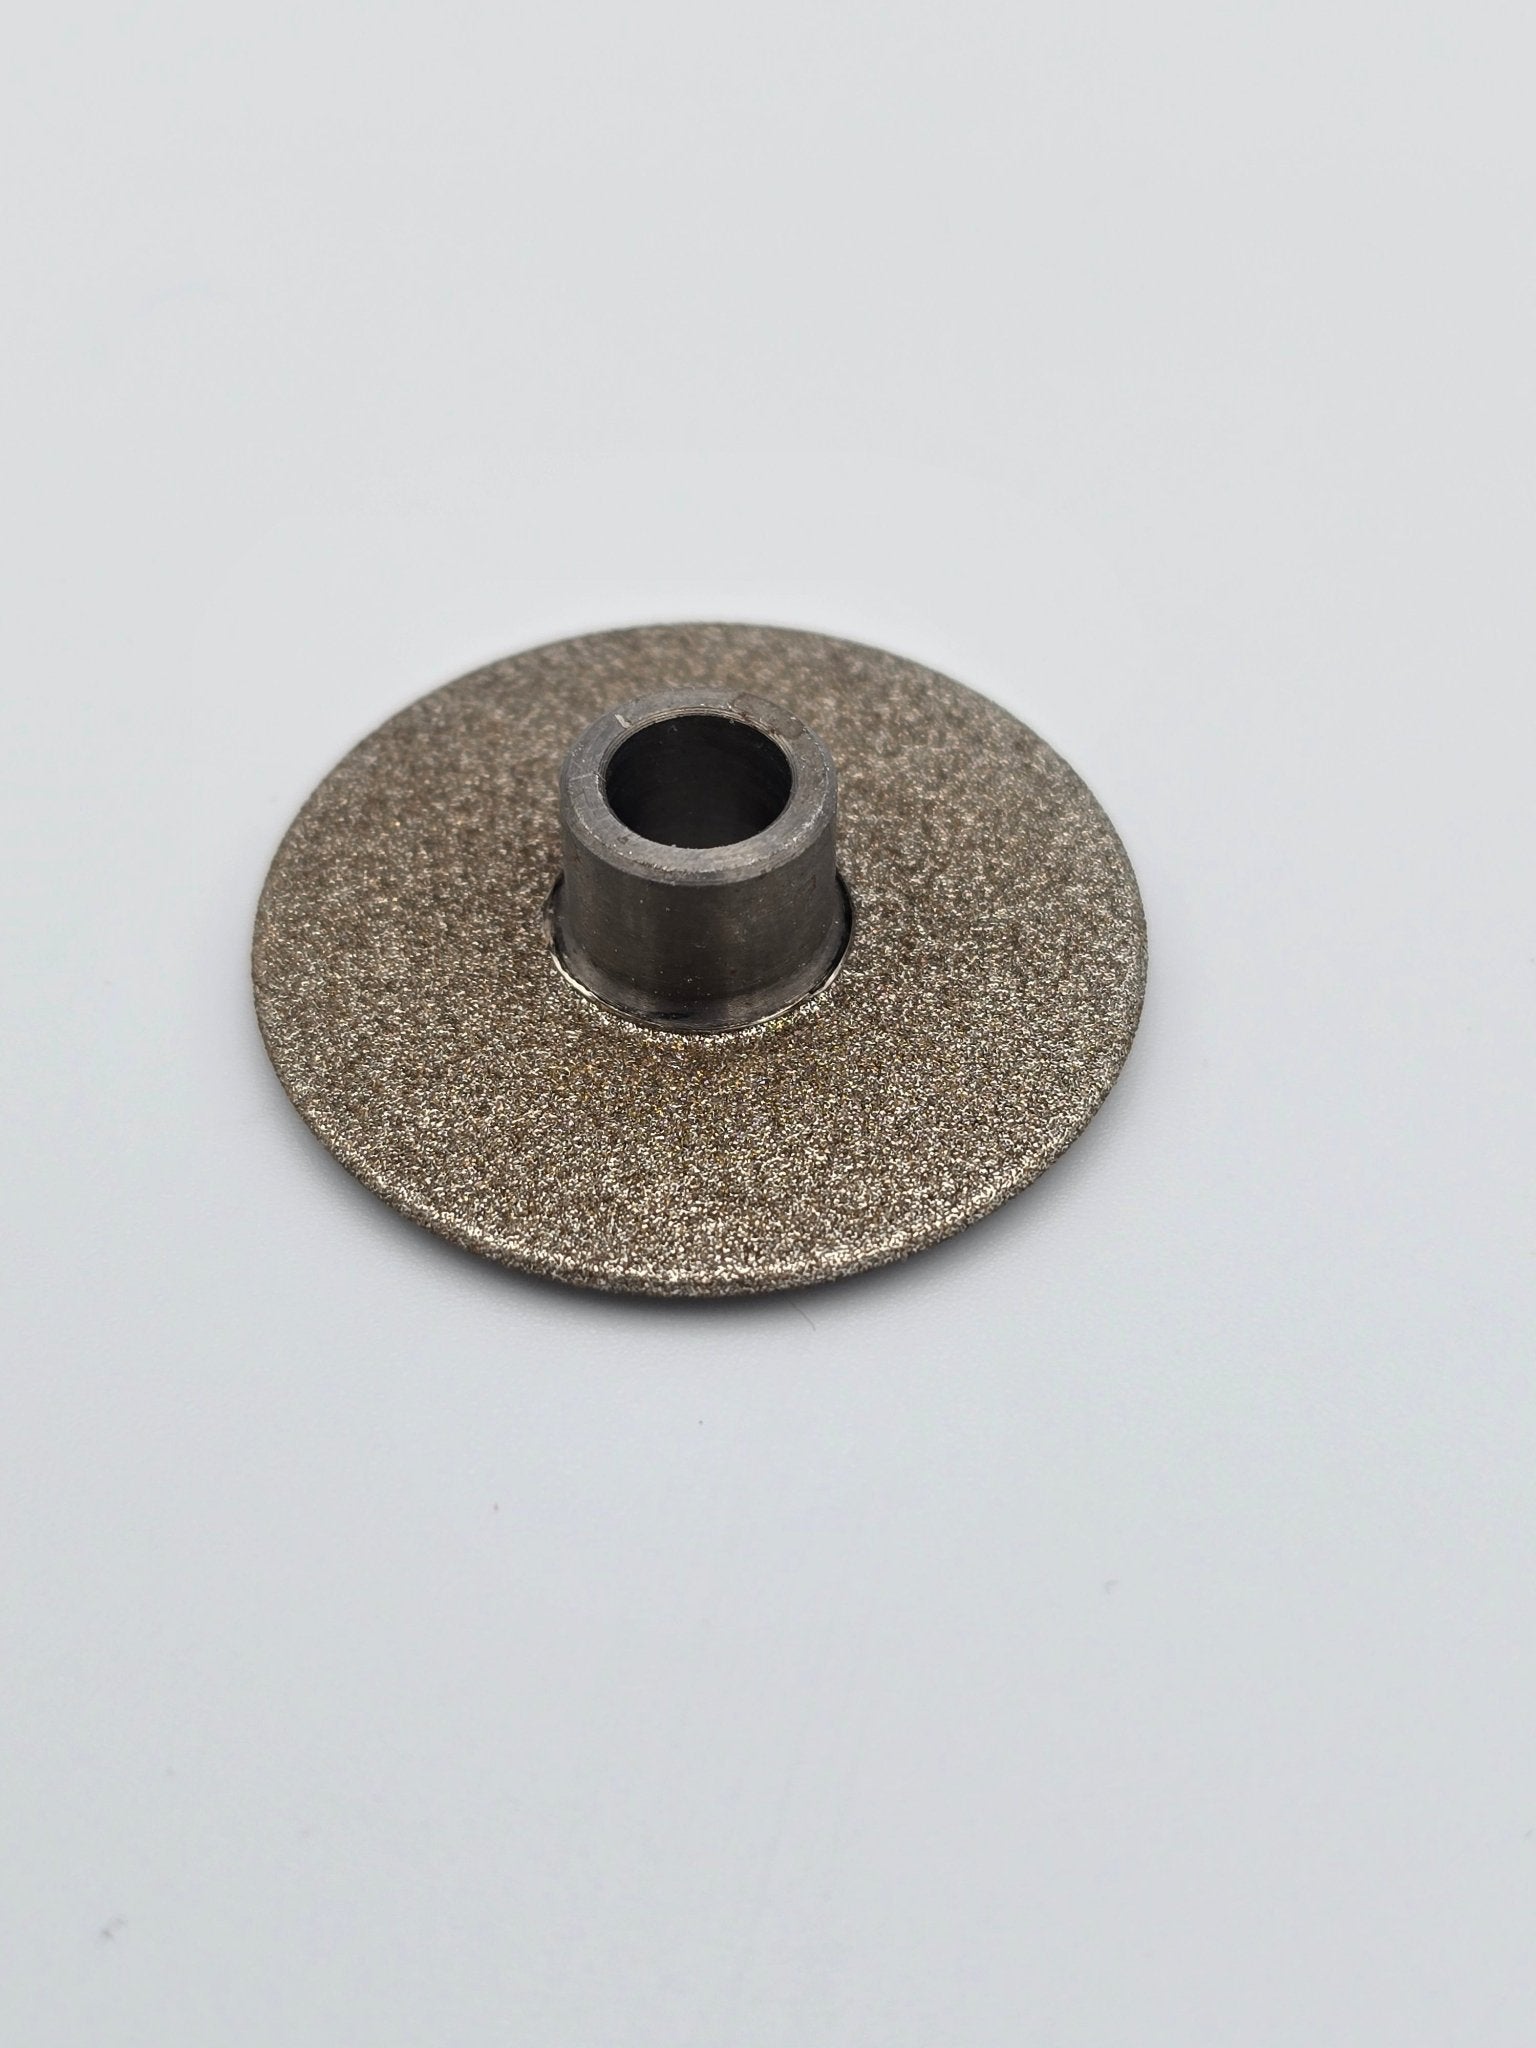 Thin Straight CBN Grinding Wheel For Steel - Tigers Teeth Blades